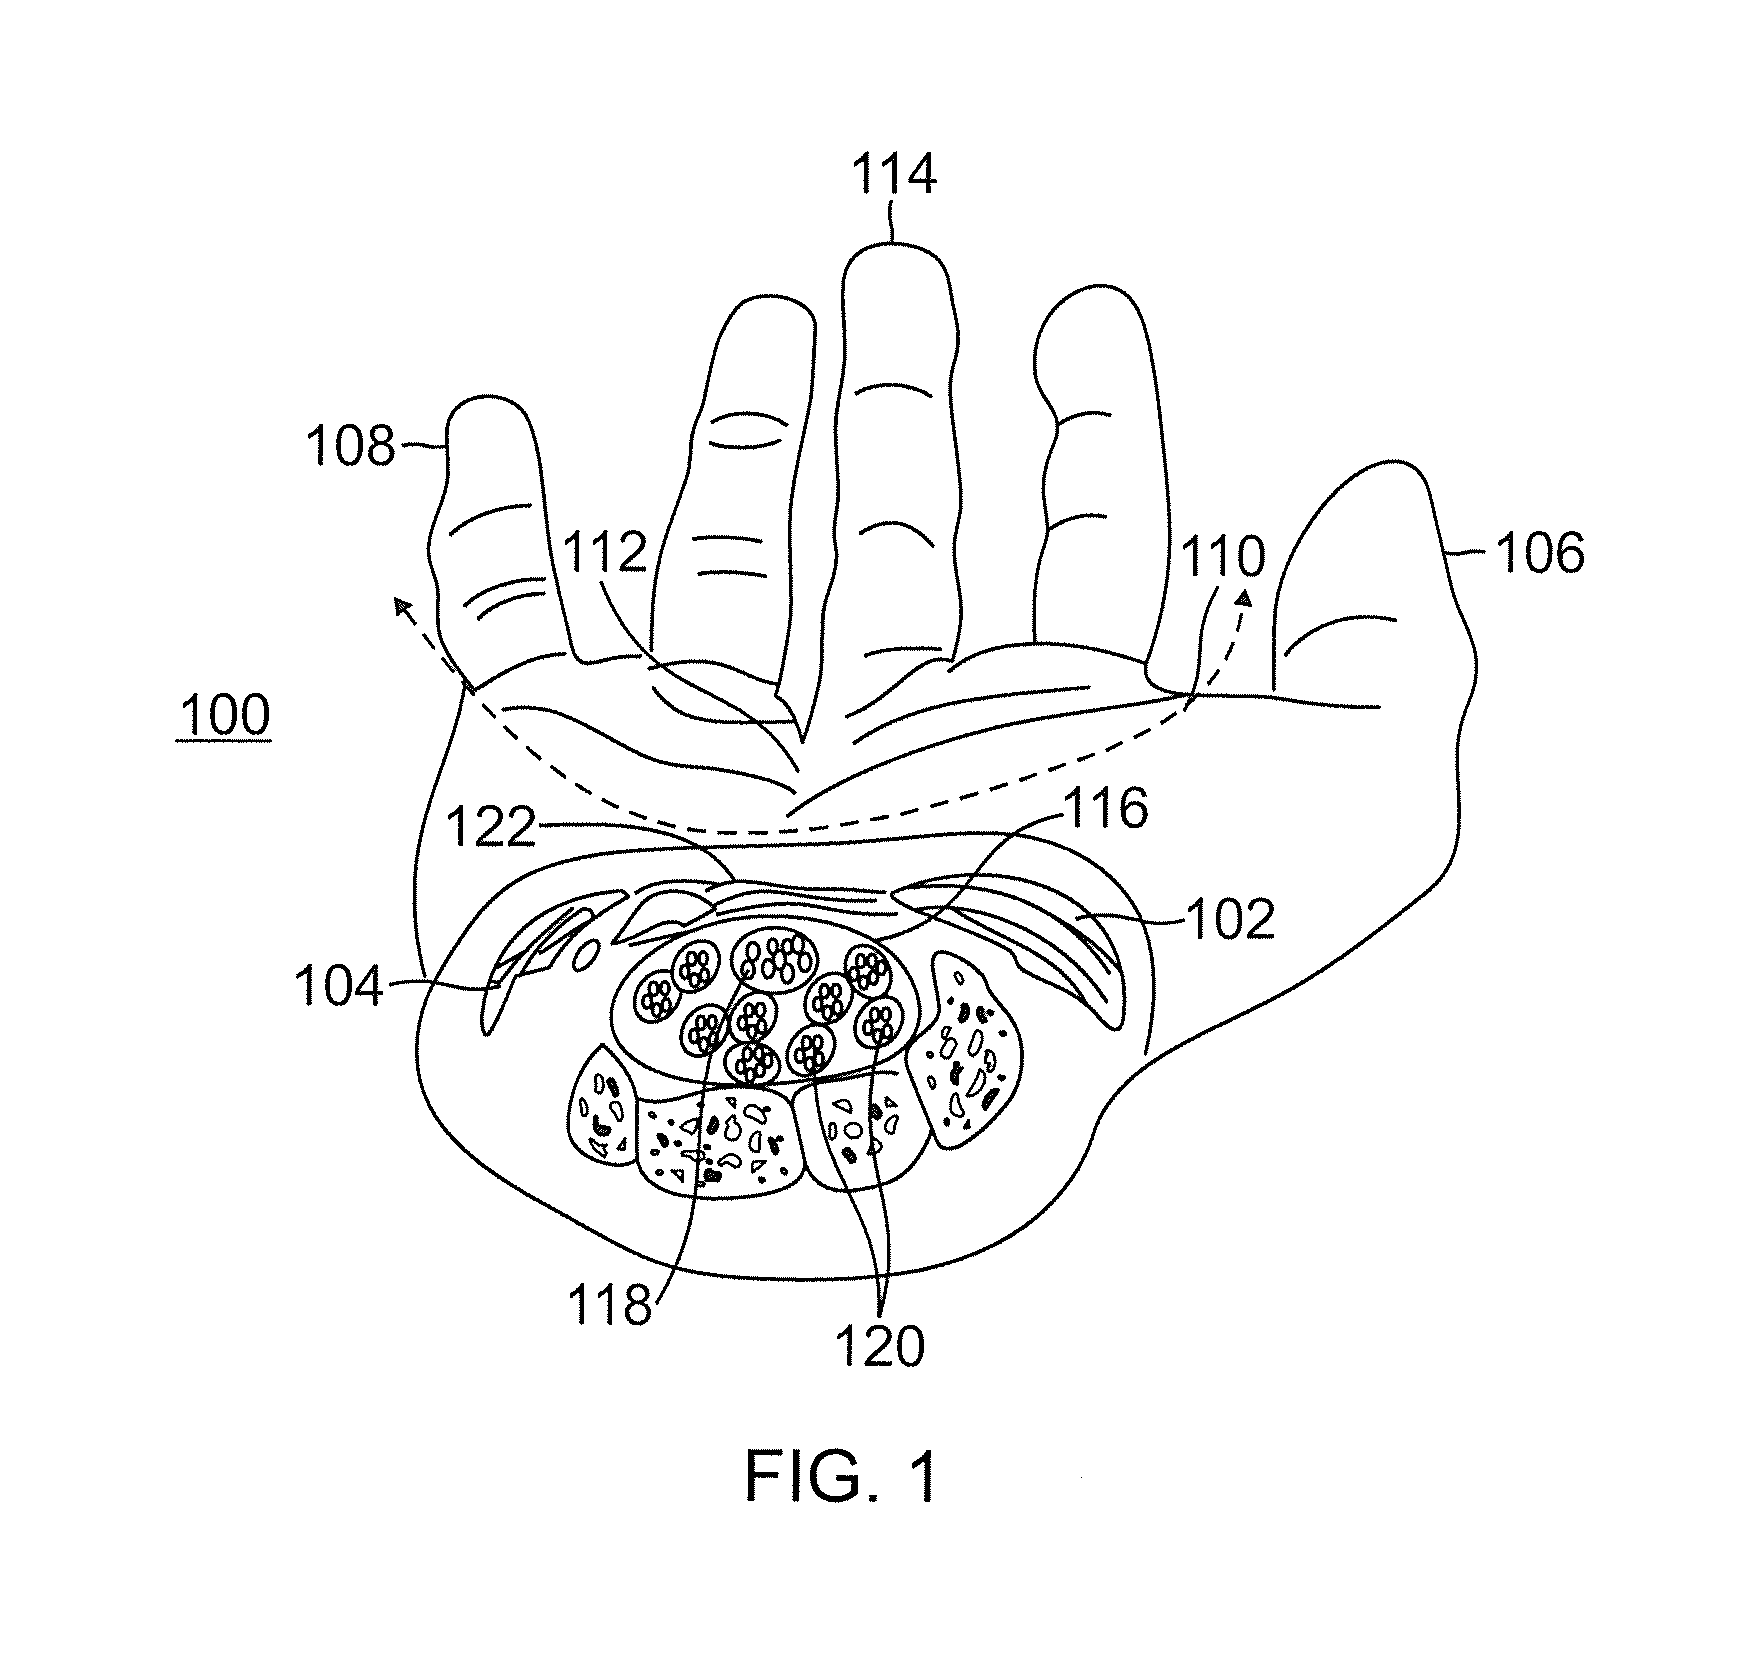 Therapeutic skin lifting device and related systems and methods